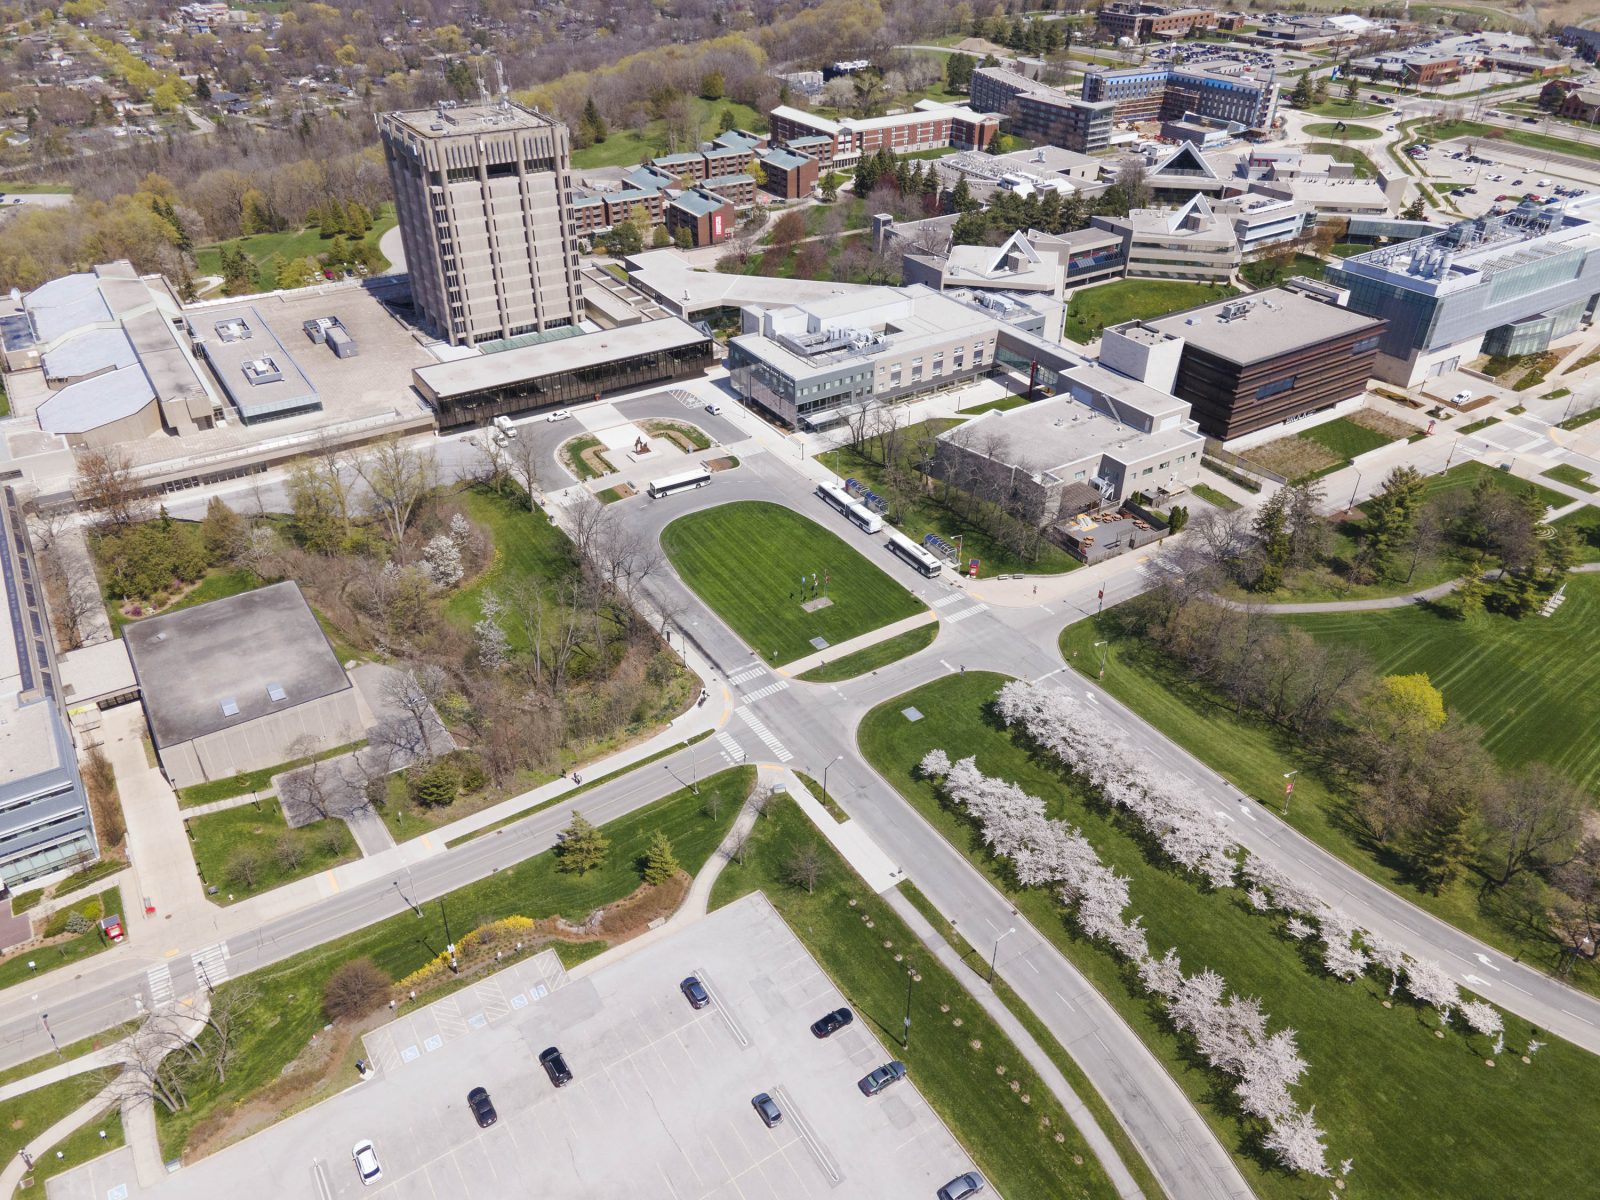 An aerial photo of Brock University's main campus.